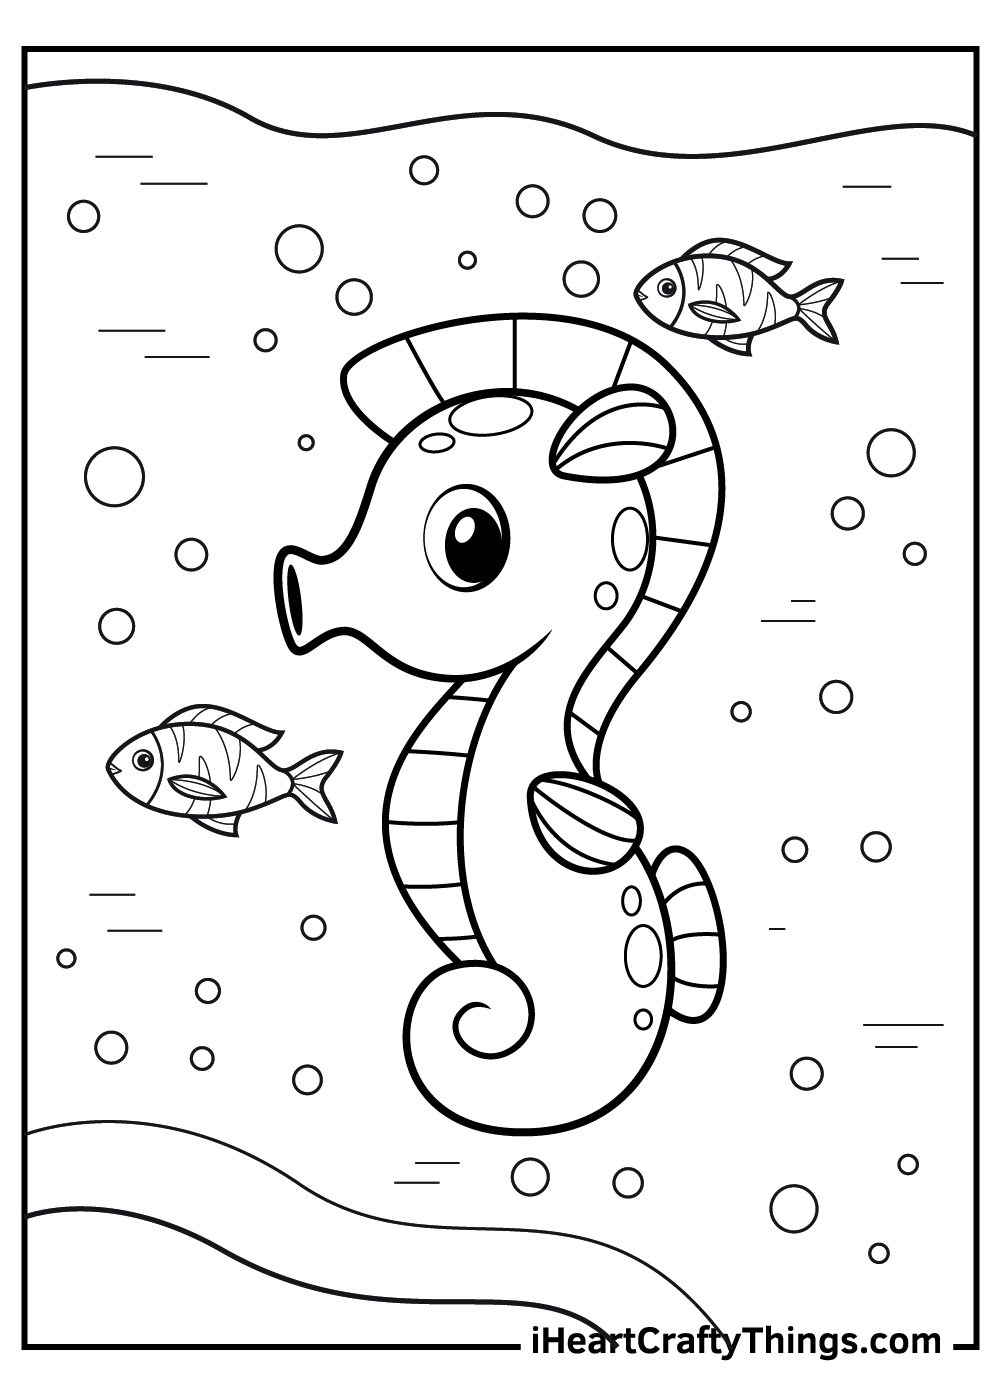 seahorse coloring pages free download